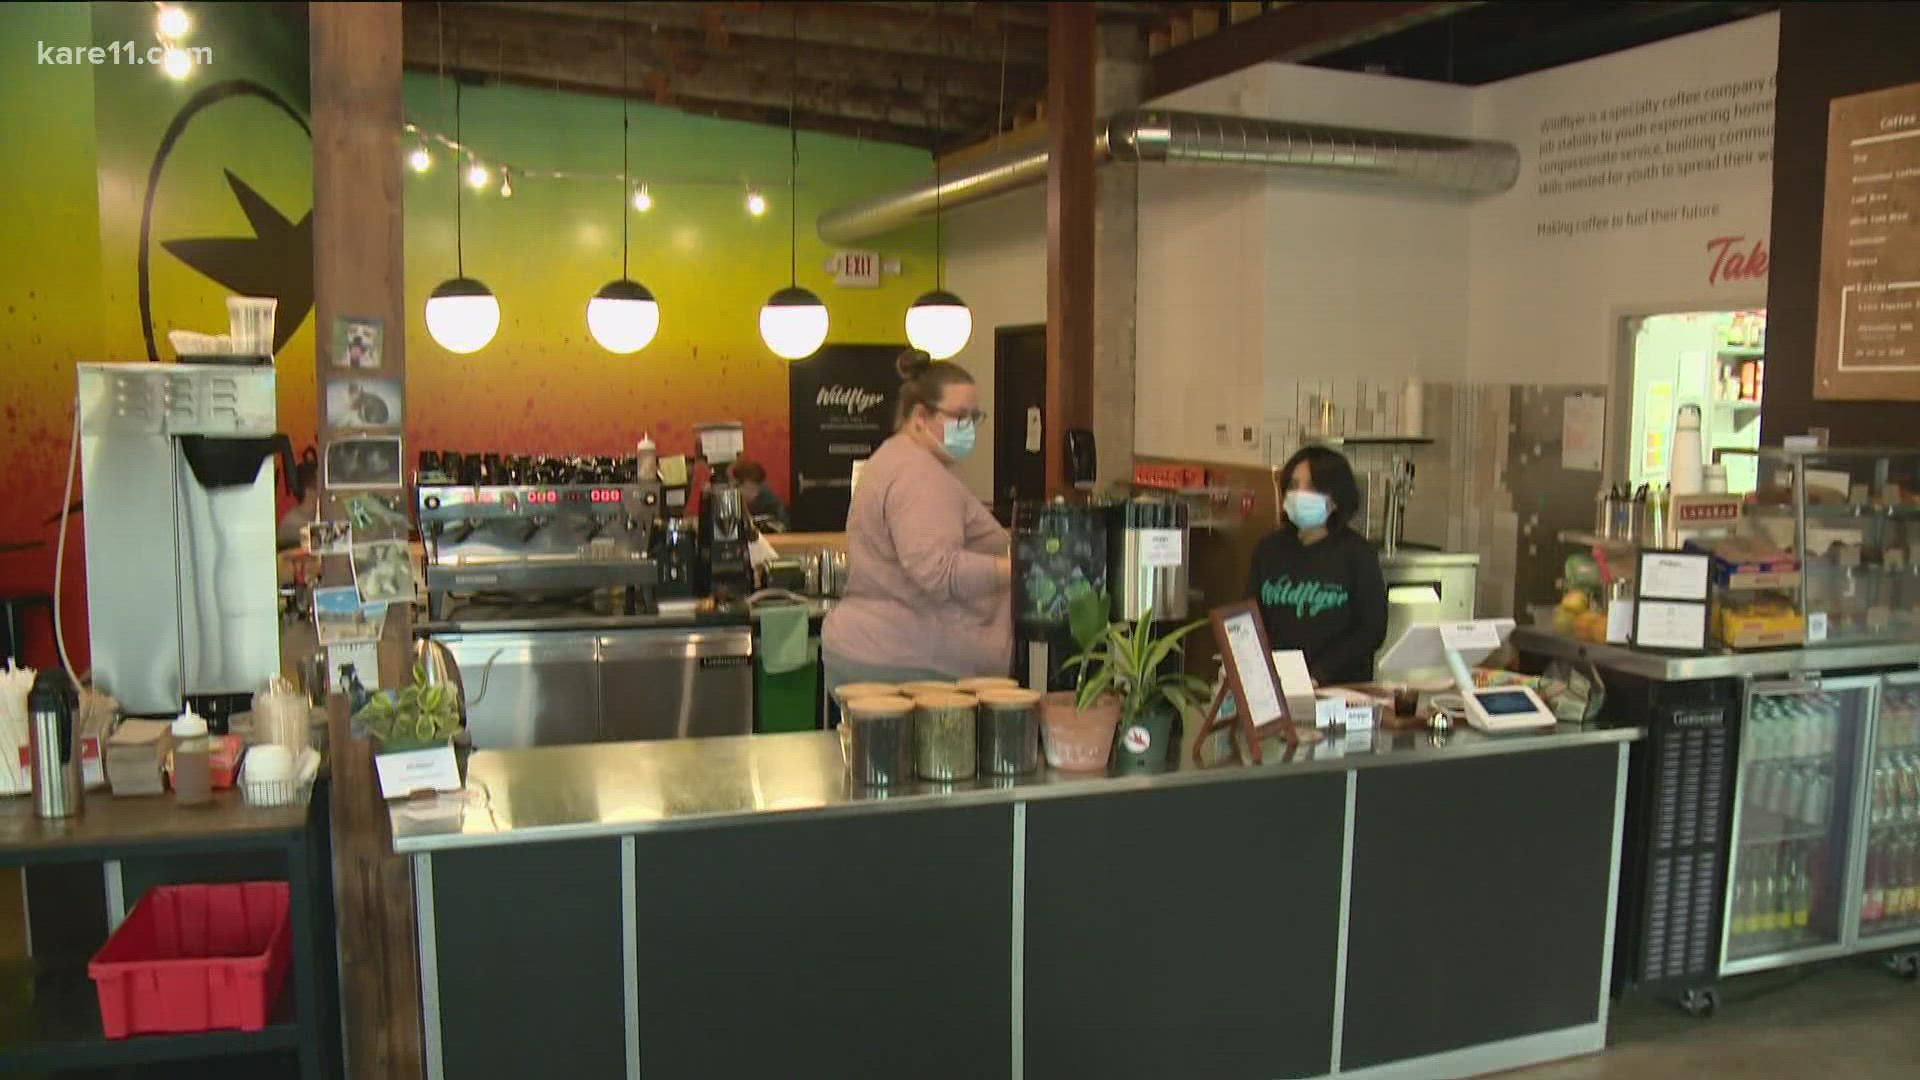 Wildflyer Coffee in Longfellow doesn't just serve up your caffeine fix - the shop works to improve the lives of young people experiencing homelessness.